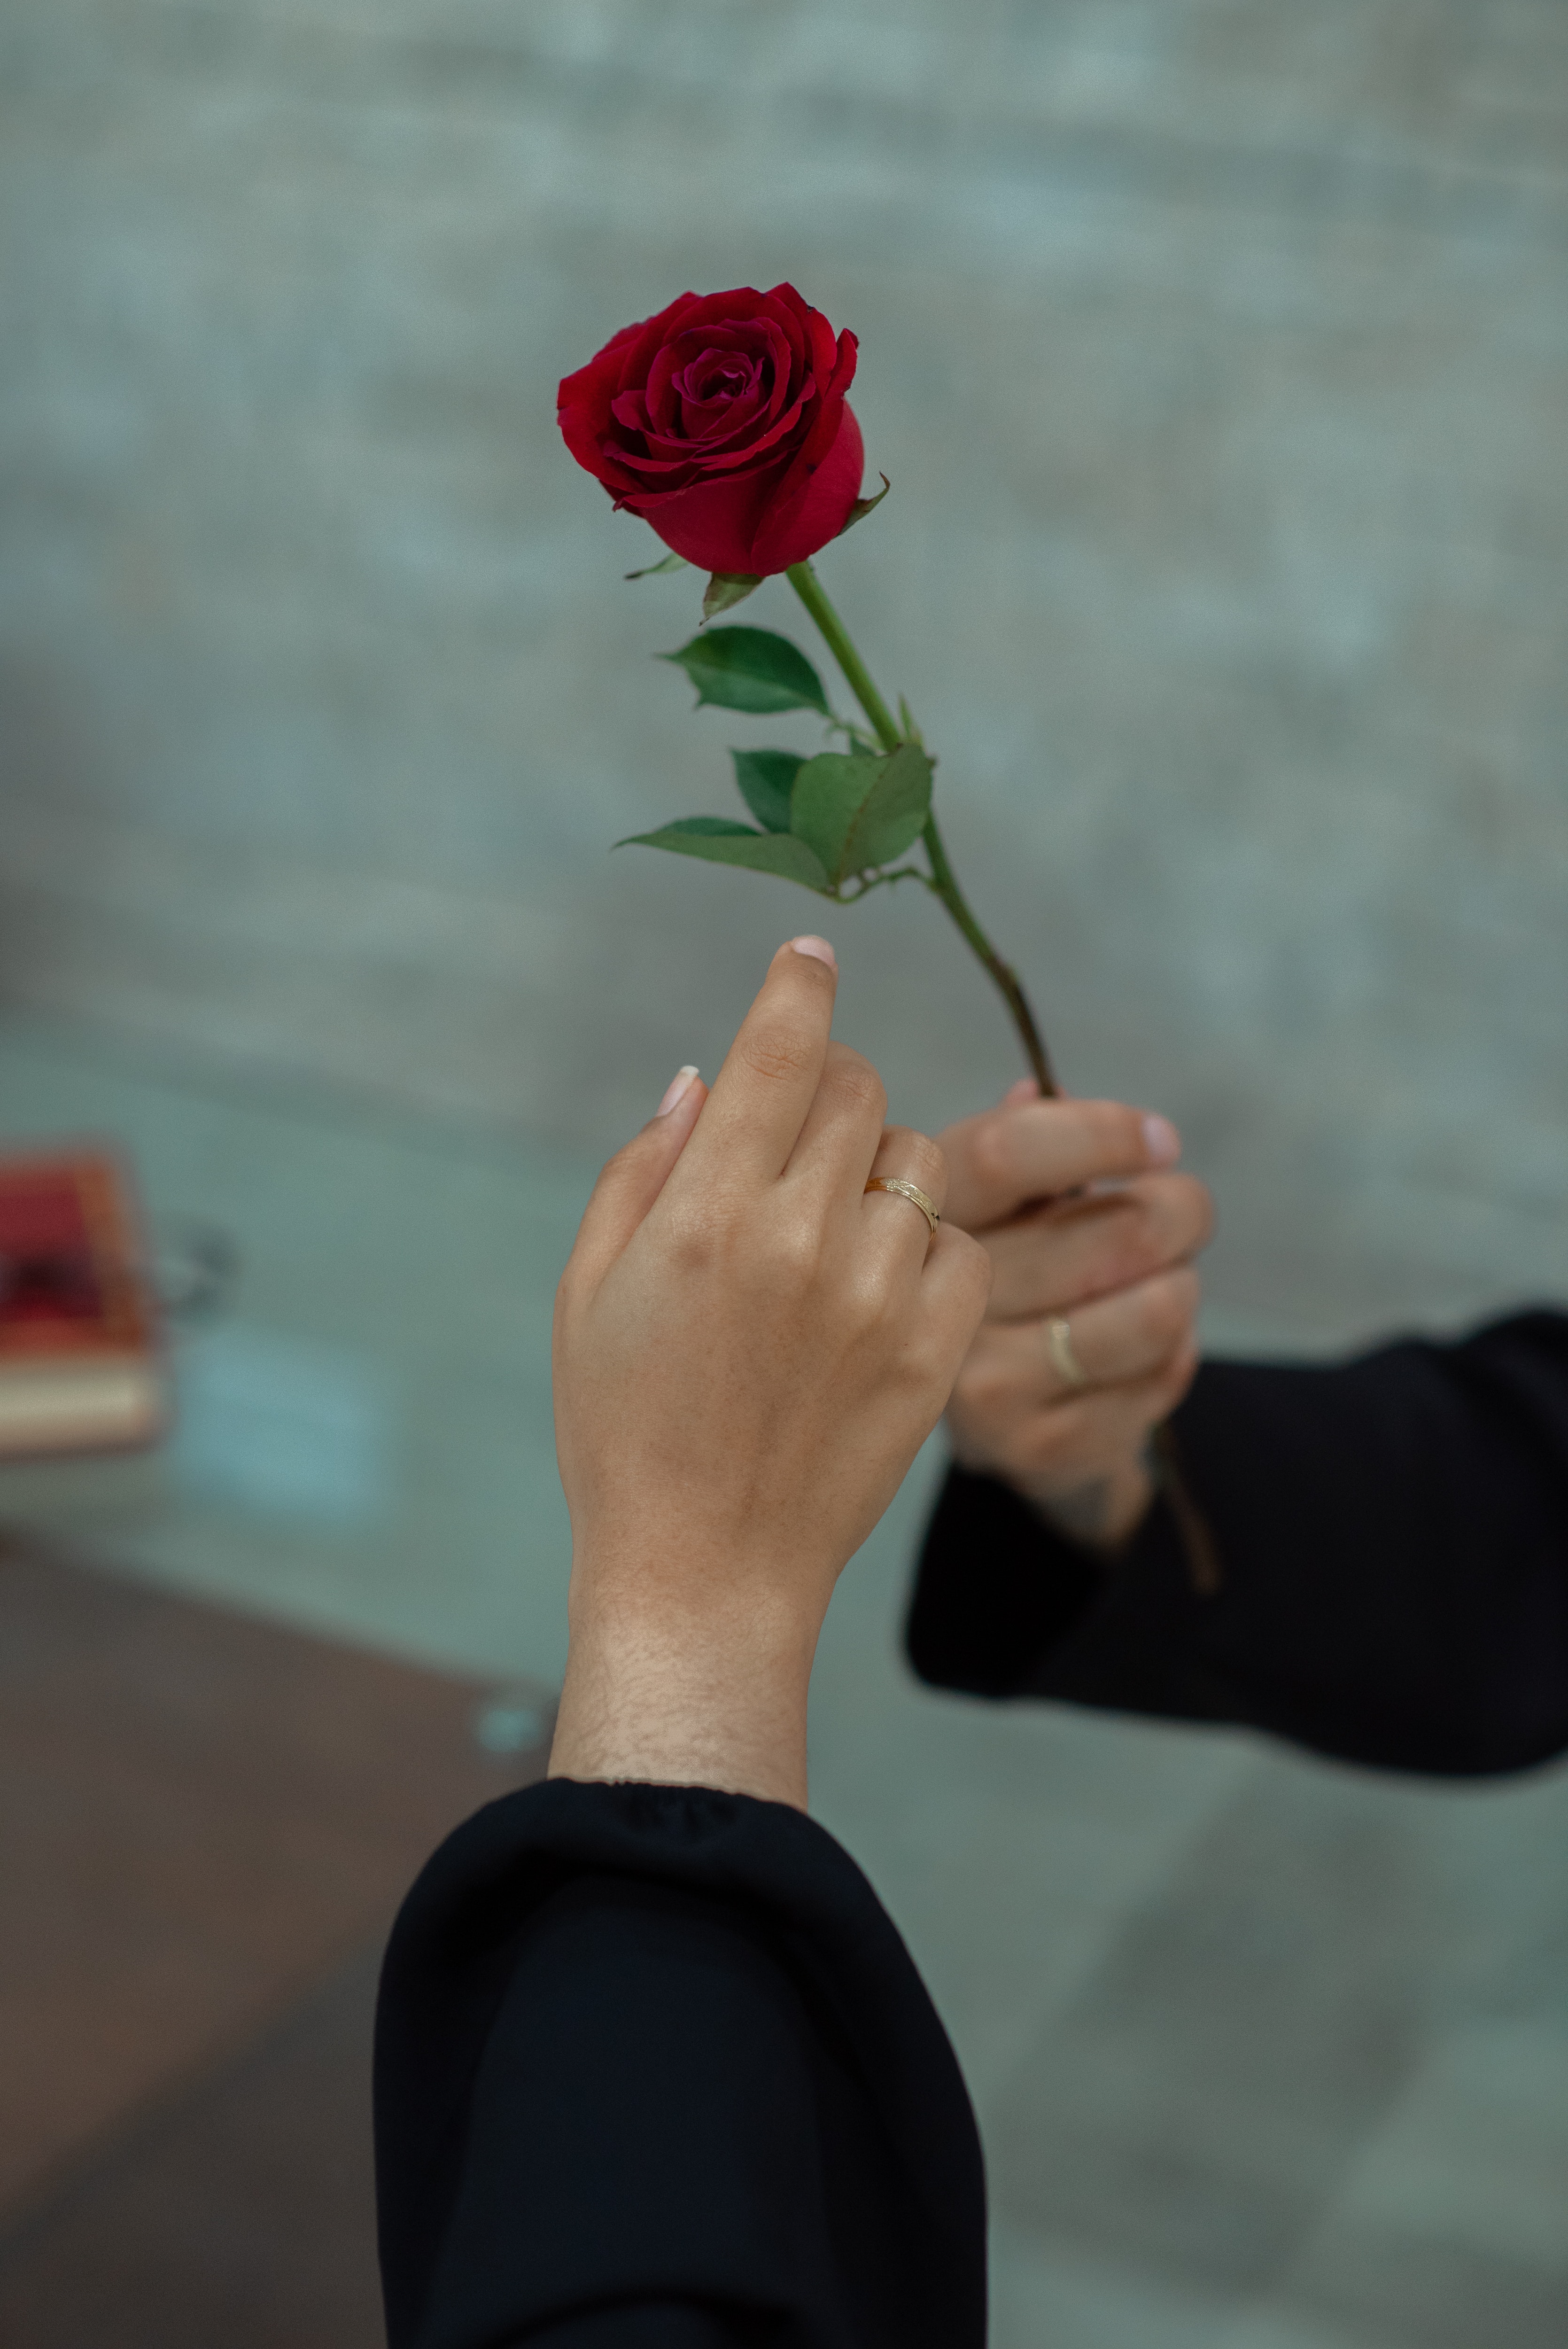 One individual handing a rose to another individual. | Source: Pexels